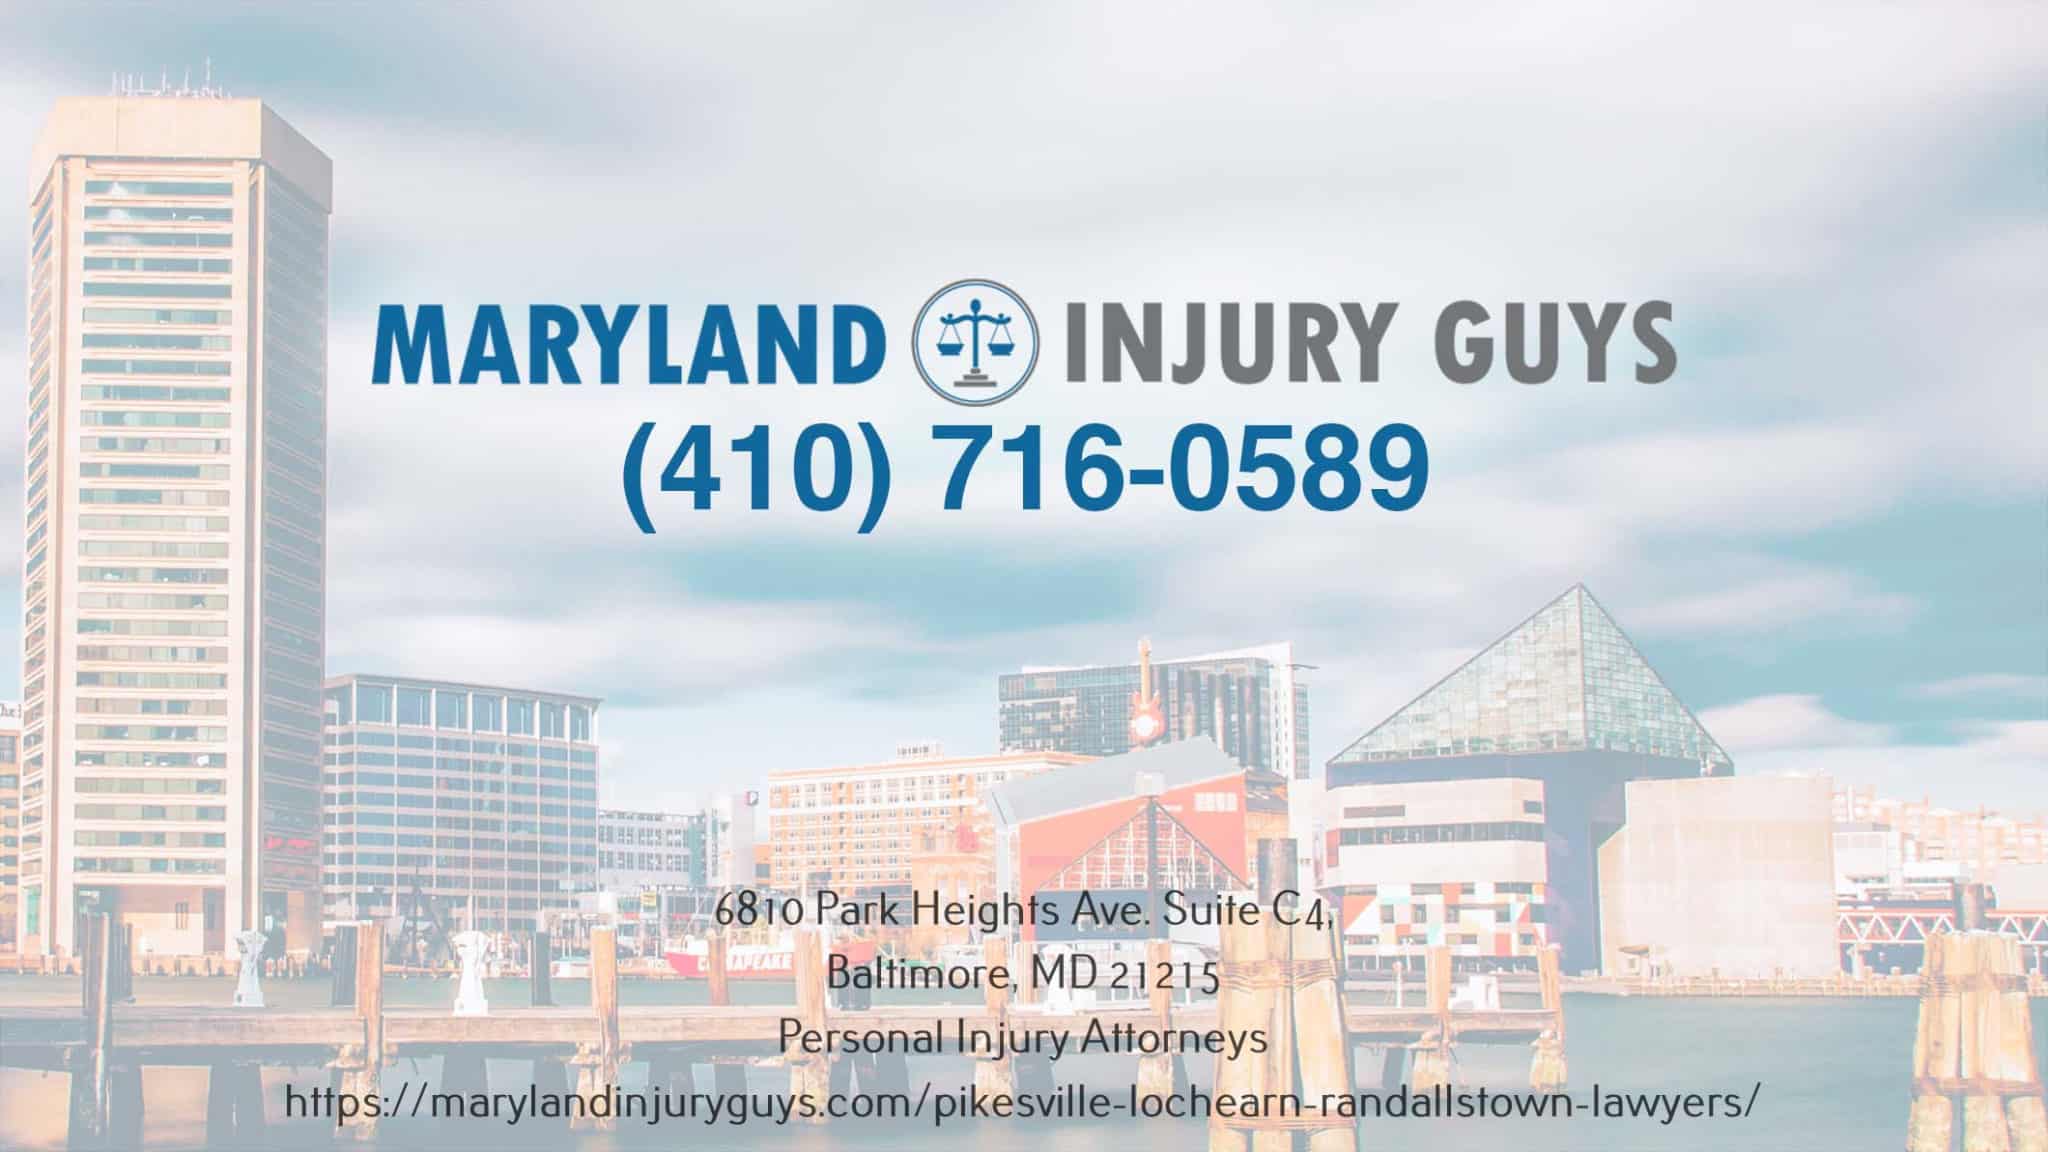 This Pikesville Boat Collision Personal Injury Attorney Offers Free Case Reviews